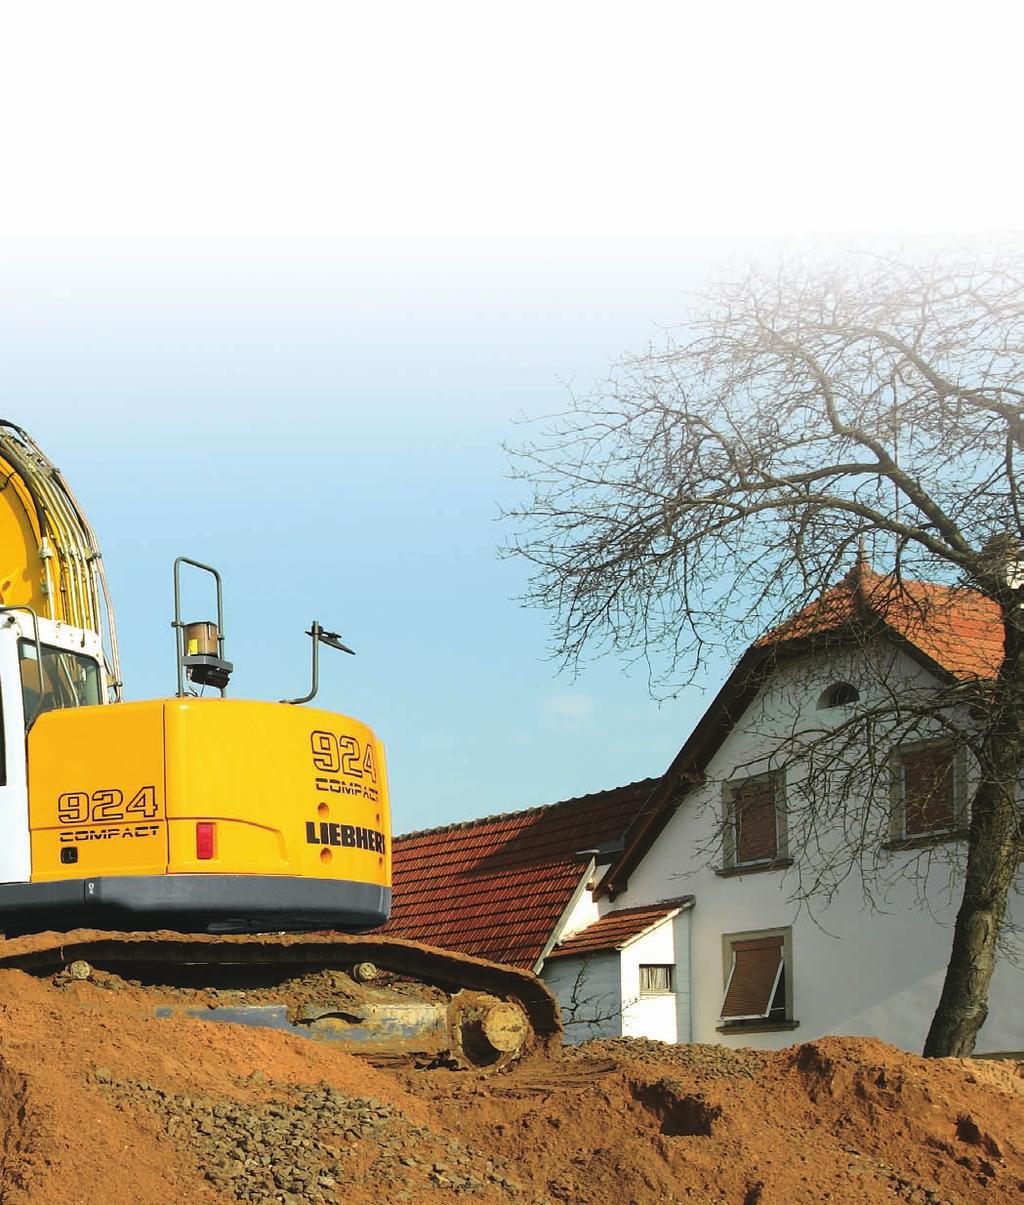 Performance The Liebherr R 924 Compact combines the excellent performance of our standard excavator with the reduced swing of a compact machine.